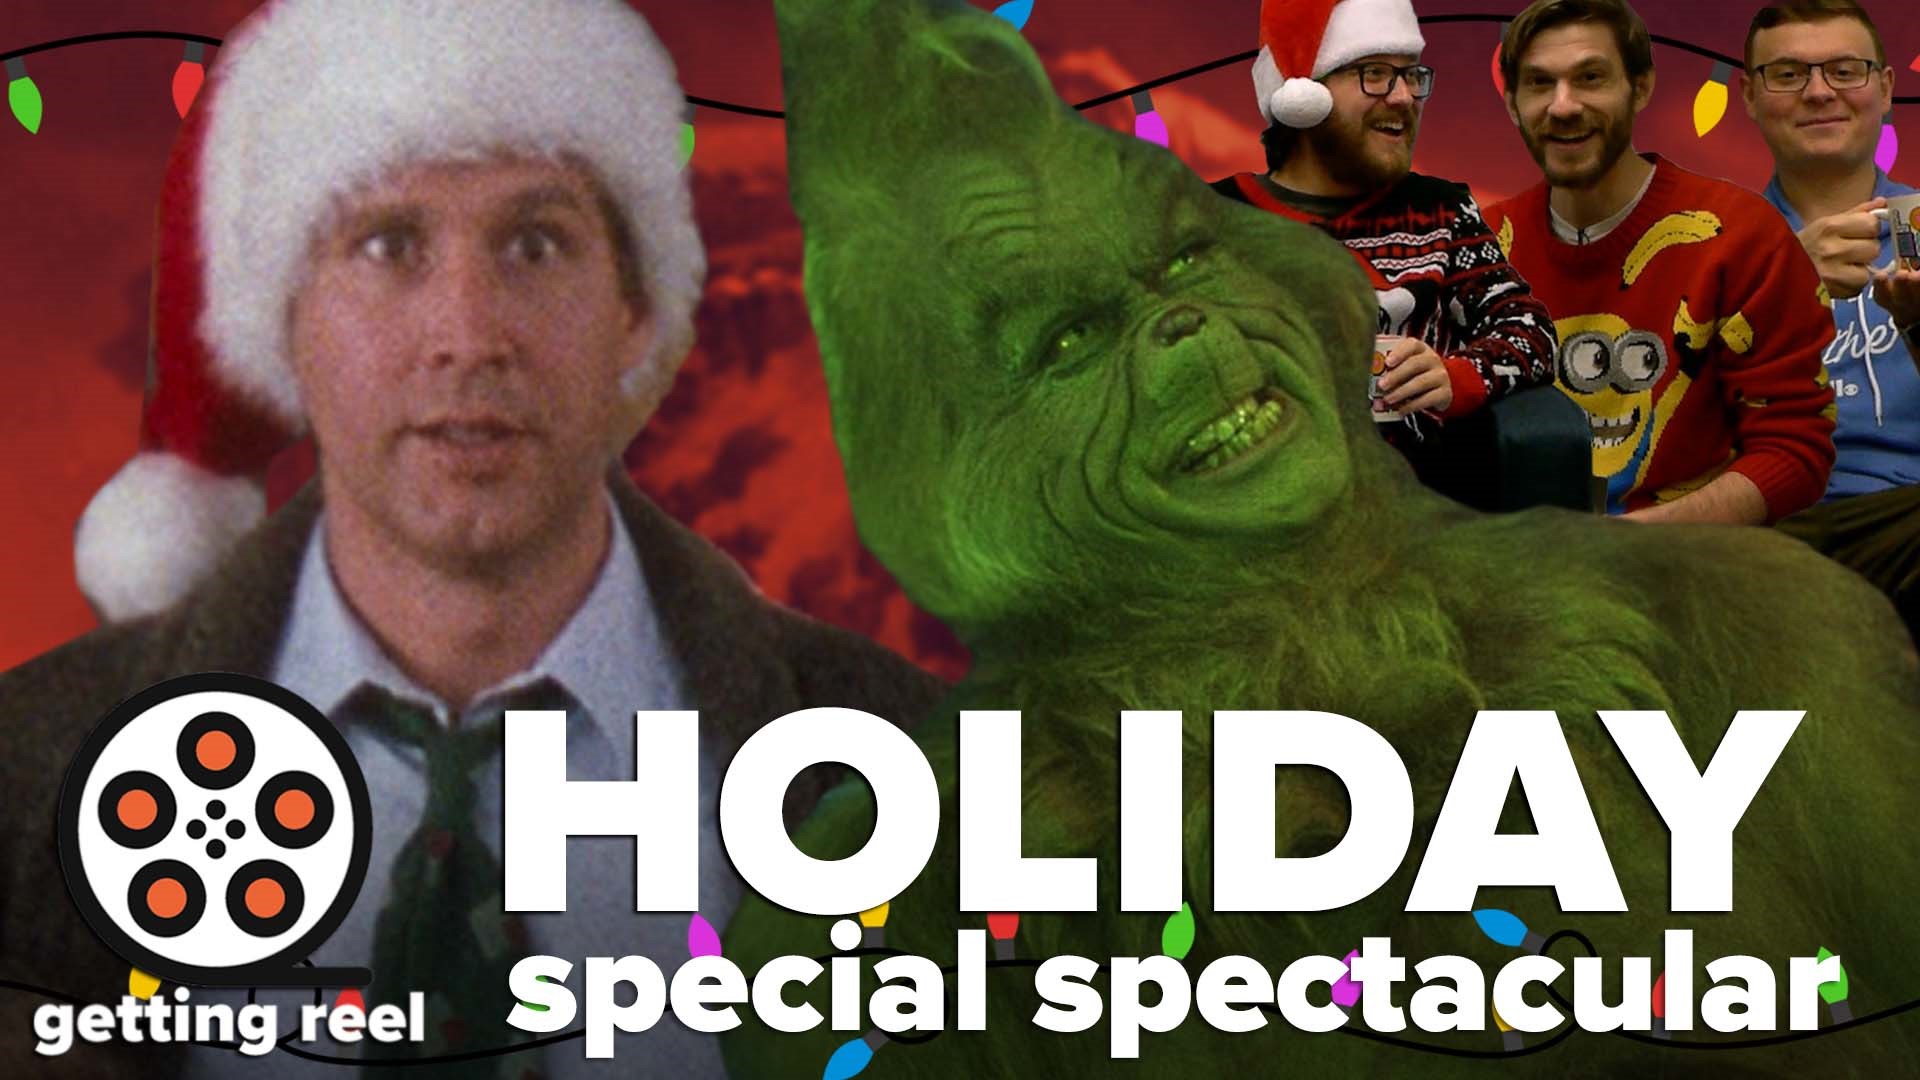 Join us as we celebrate the holiday season with the best movies, which Grinch is the best, and whether Die Hard is a Christmas movie.